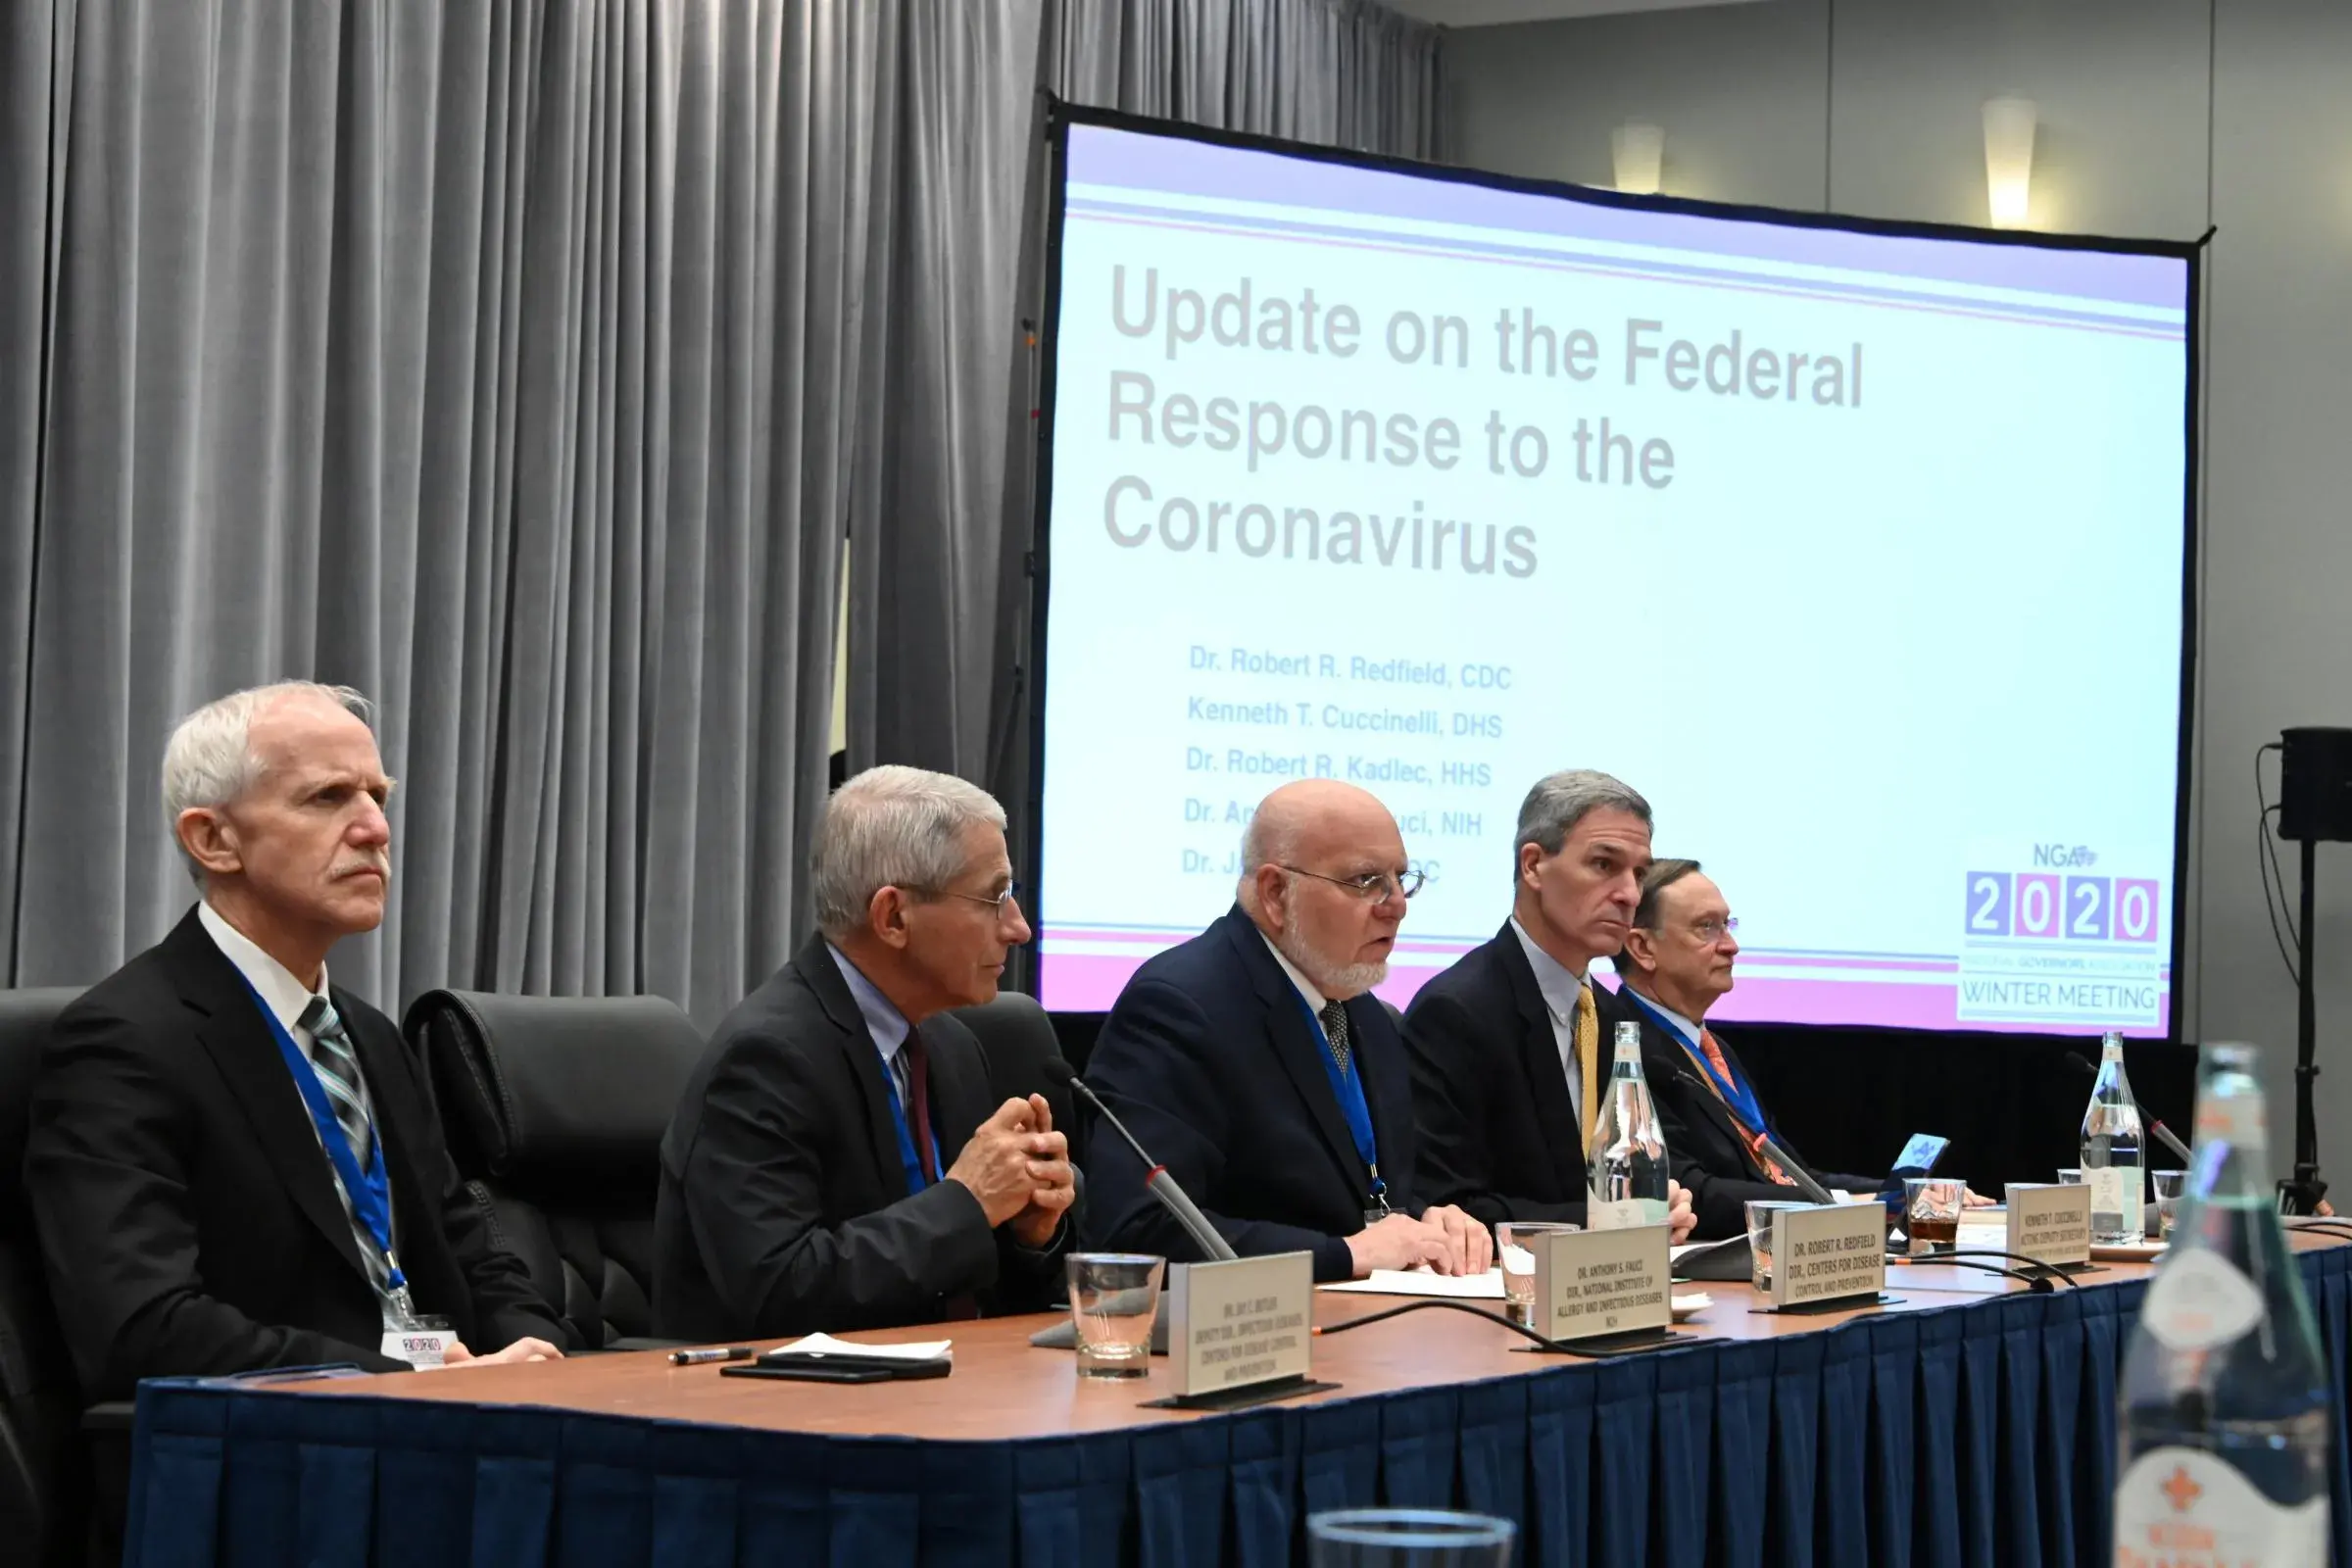 Members of the Coronavirus Task Force and a presentation labeled "Update on the Federal Response to the Coronavirus"